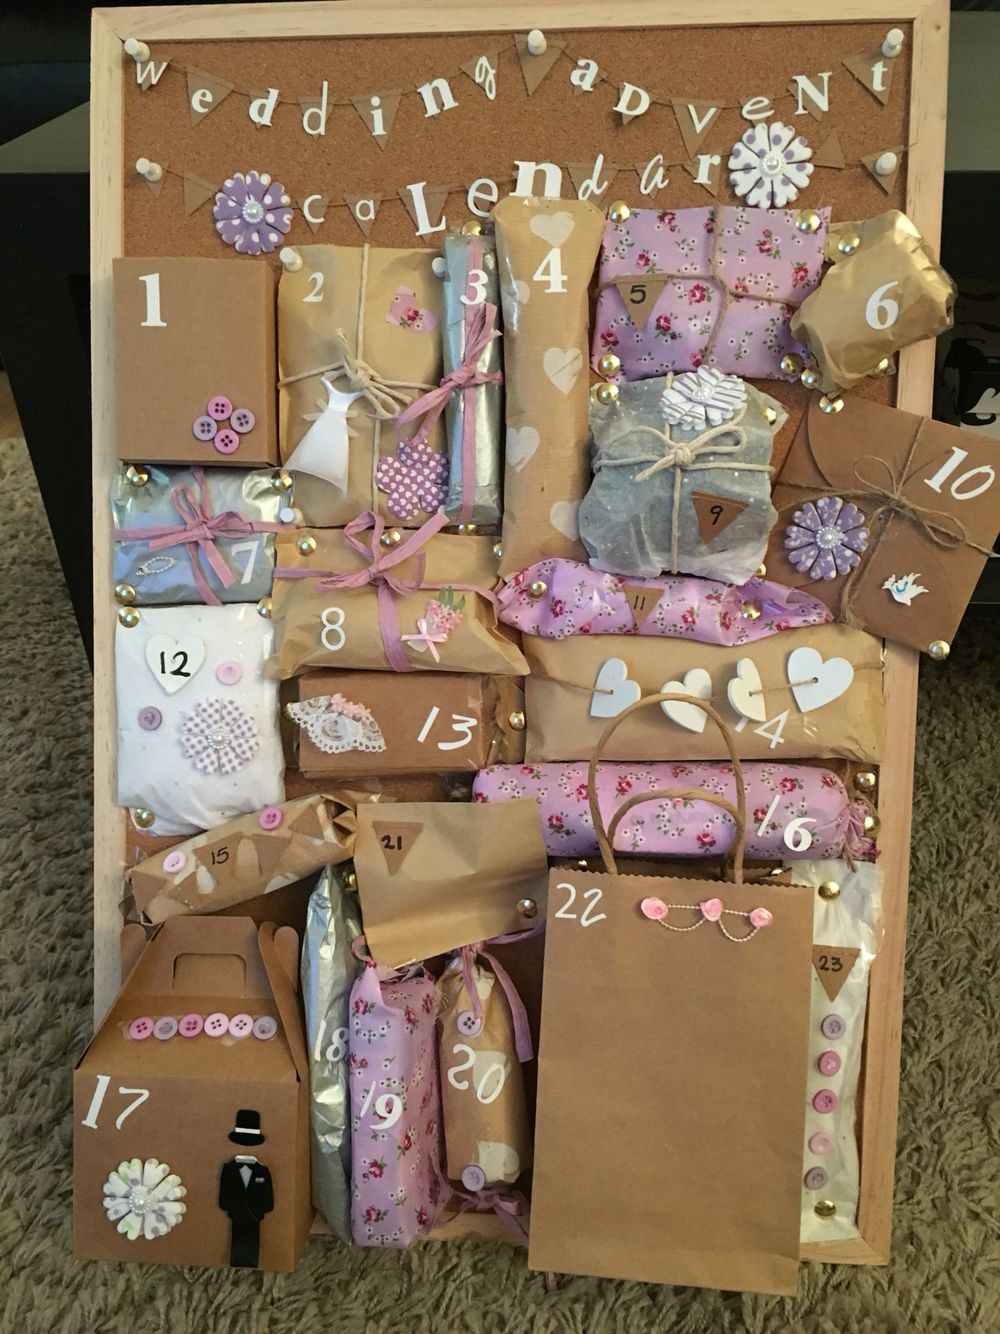 Wedding Gift Ideas For Best Friend Bride
 Made this wedding advent calendar for my best friend who